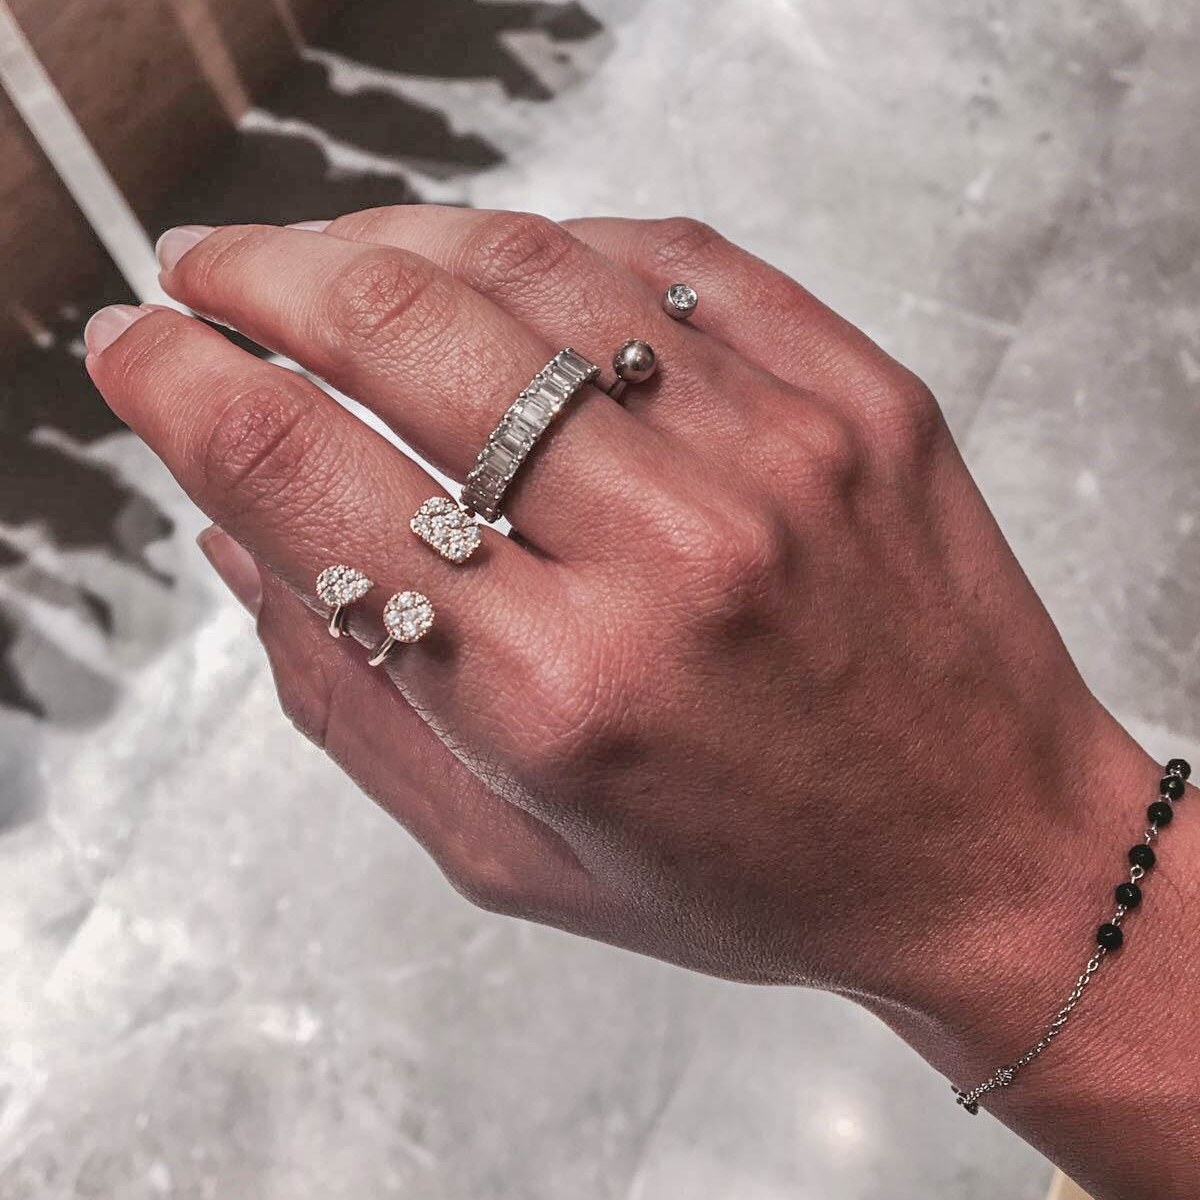 Danielle's Armor: Rings from her Molecule Collection